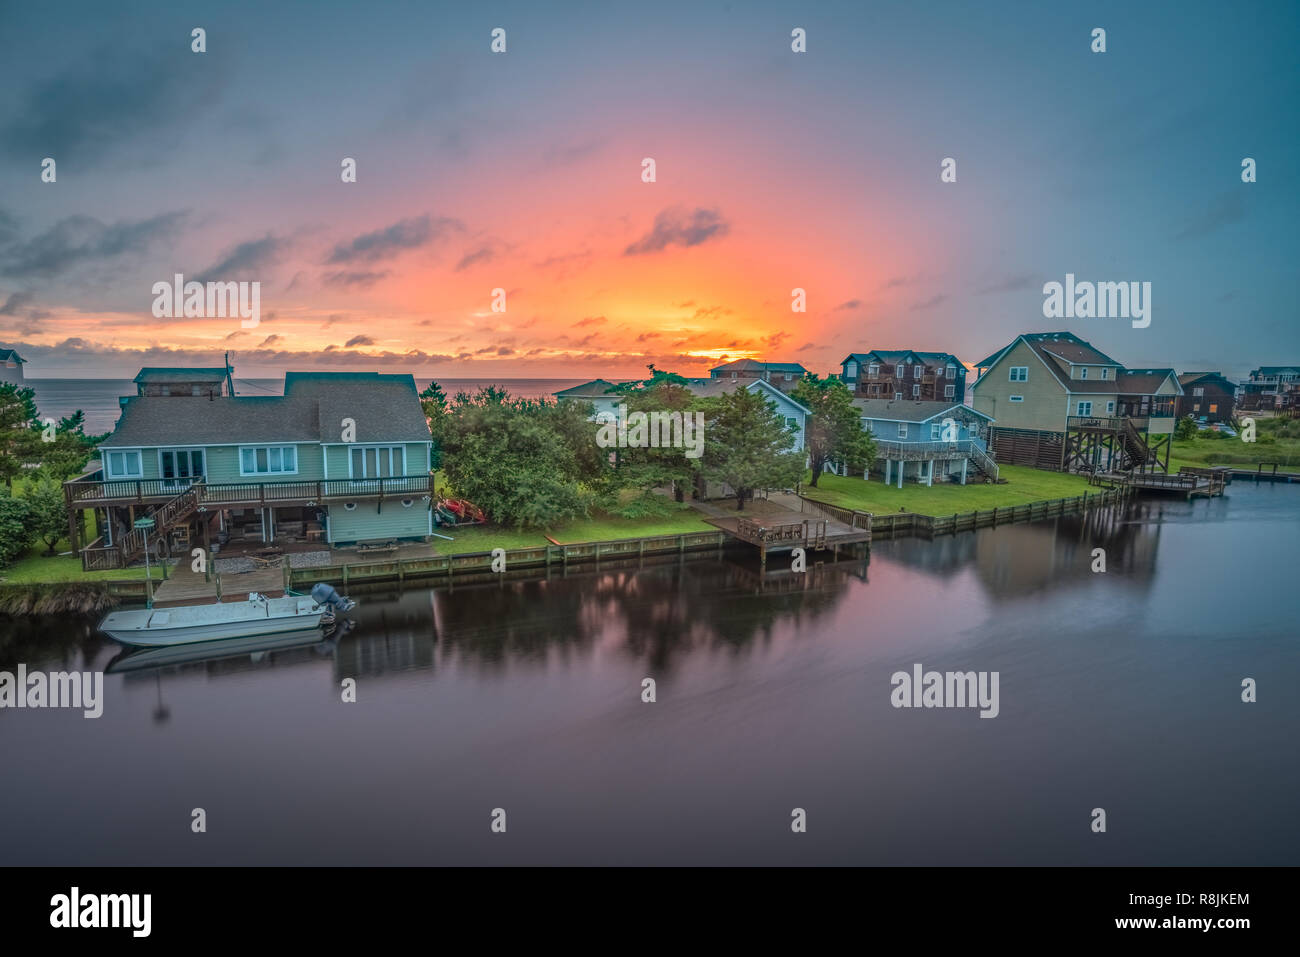 The sun sets behind a row of waterfront cottages on Hatteras Island, NC. Stock Photo